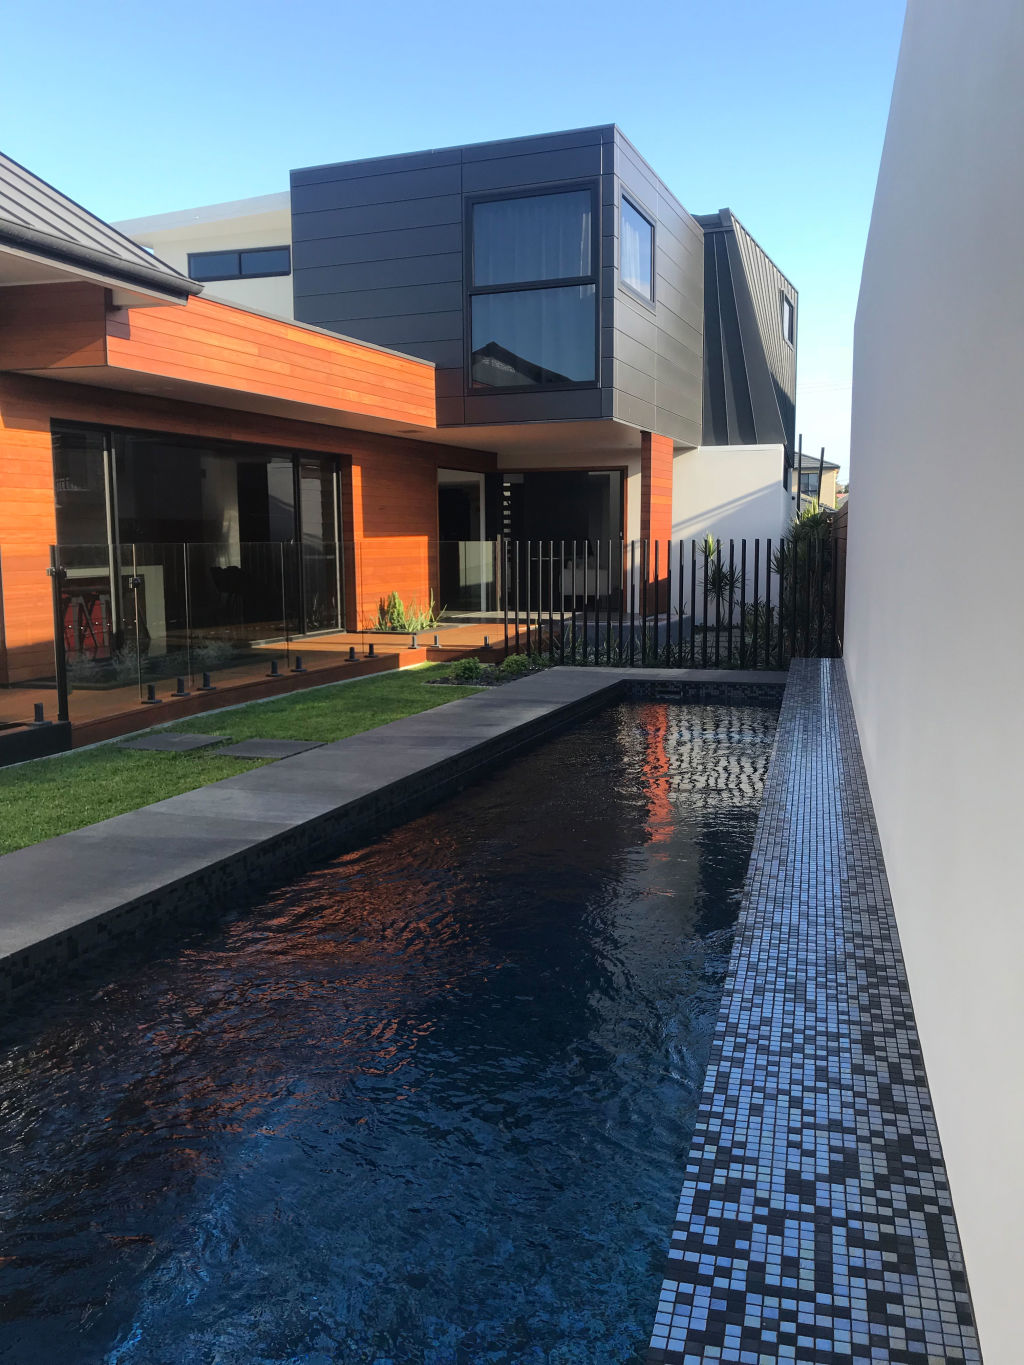 Simple and clean lines will always be in style. Photo: Octopus Garden Design